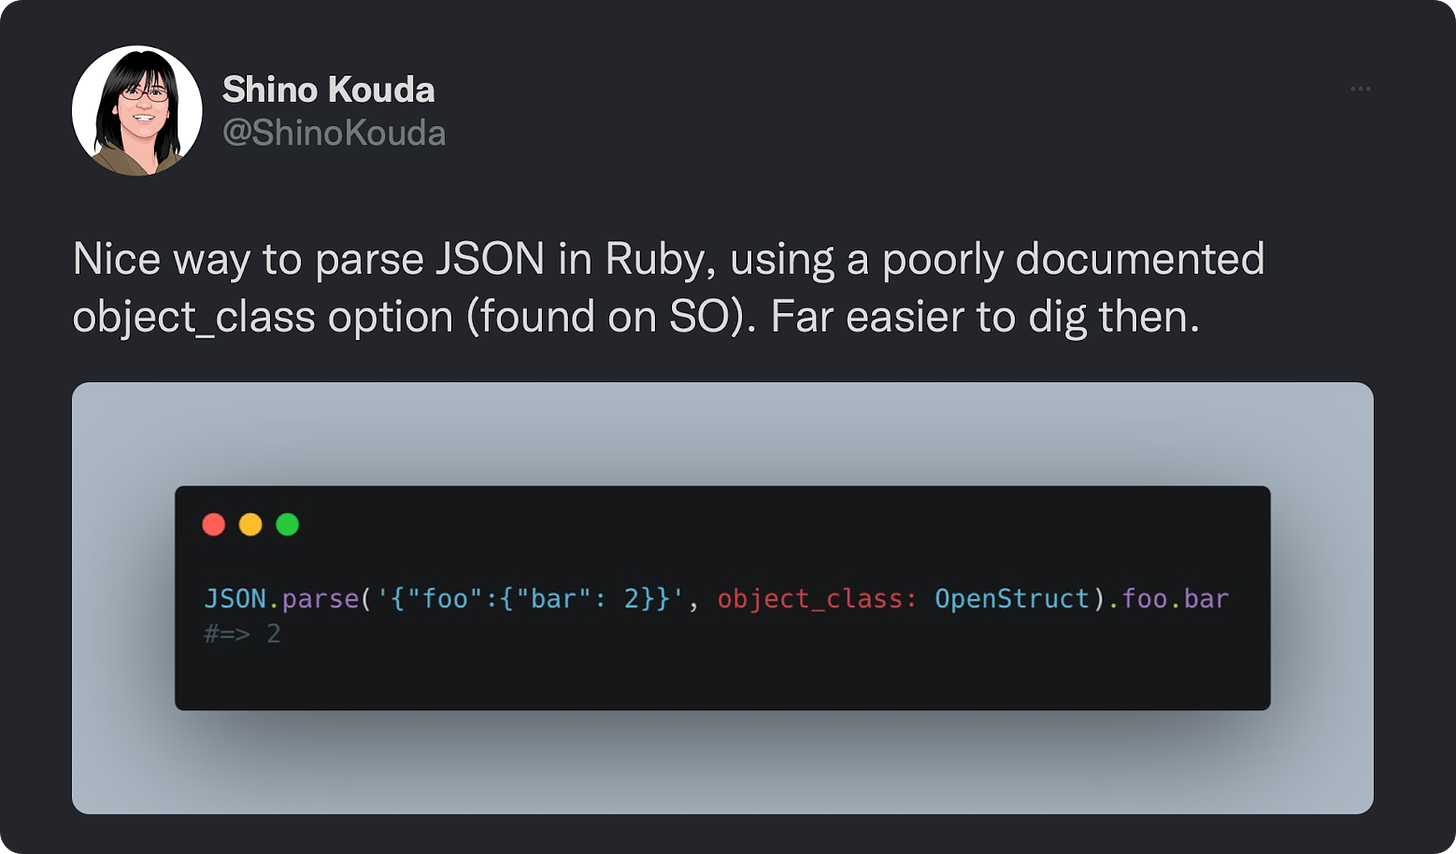 Nice way to parse JSON in Ruby, using a poorly documented object_class option (found on SO). Far easier to dig then.